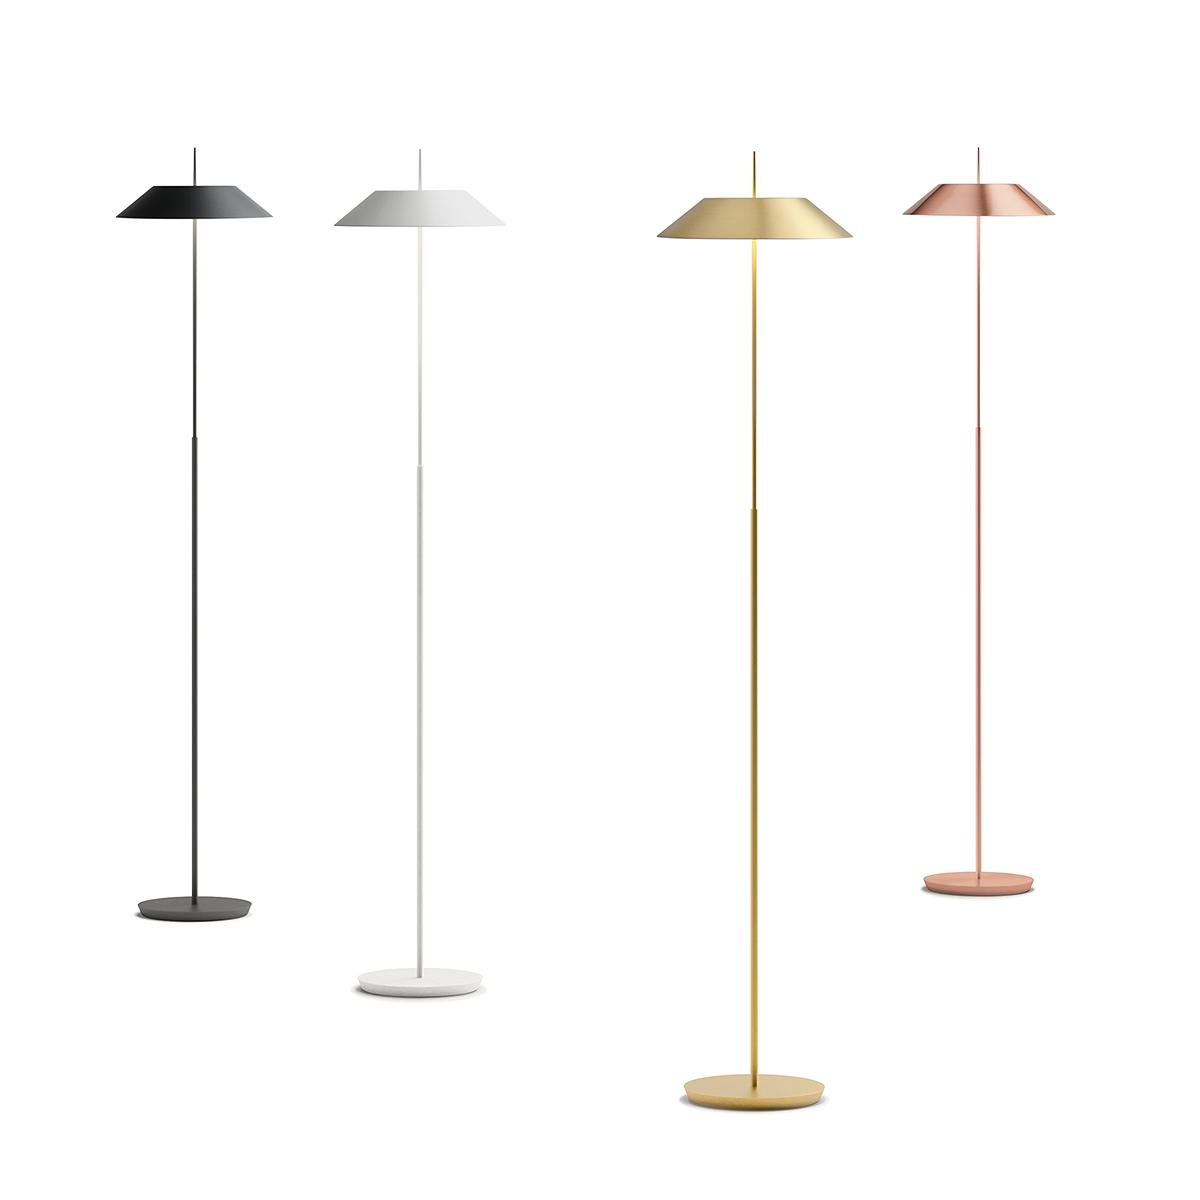 The Mayfair lamps are a Diego Fortunato design proposal. The entire Mayfair collection incorporates LED lighting and comes in various finishes: white, black and gold.

Installation type: Surface mounted

Shade: Polycarbonate